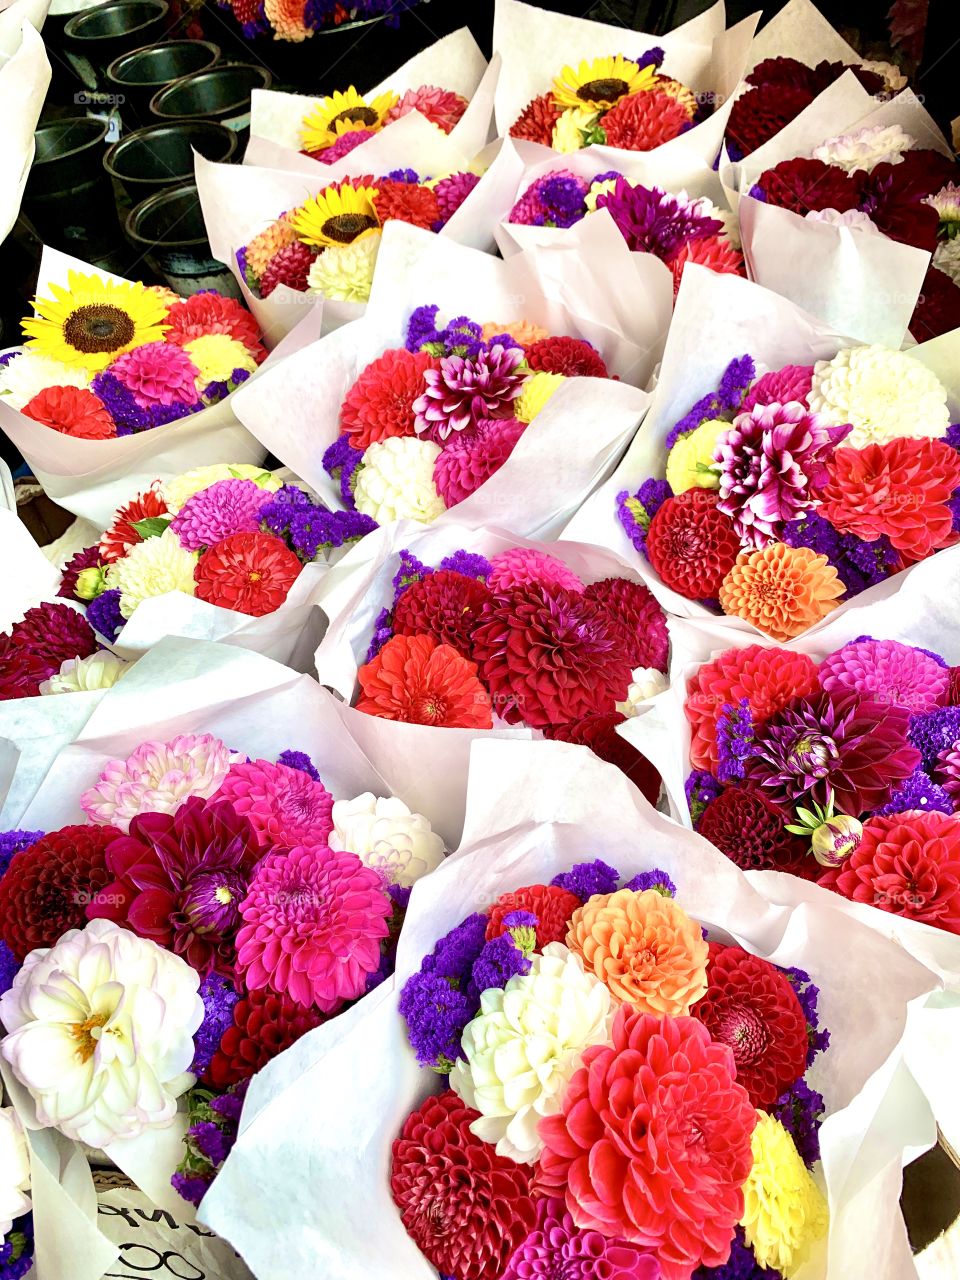 Vibrant bouquets of flowers at a farmers market in Seattle, WA.